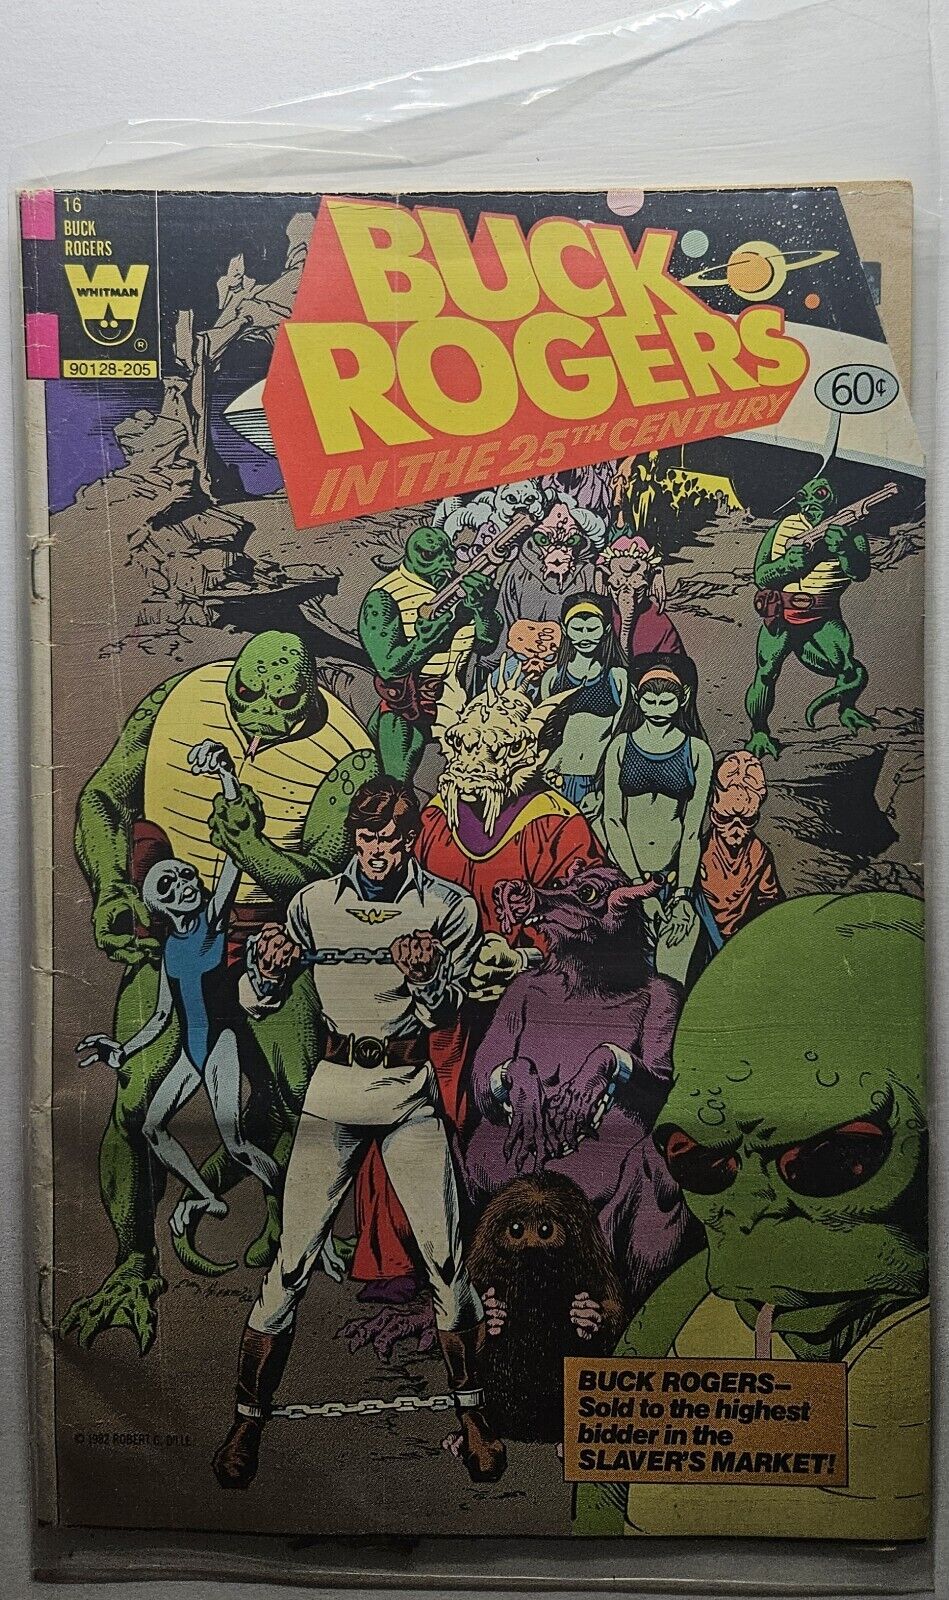 Buck Rogers in the 25th Century #16 (WHITMAN PUBLISHING, 1982)